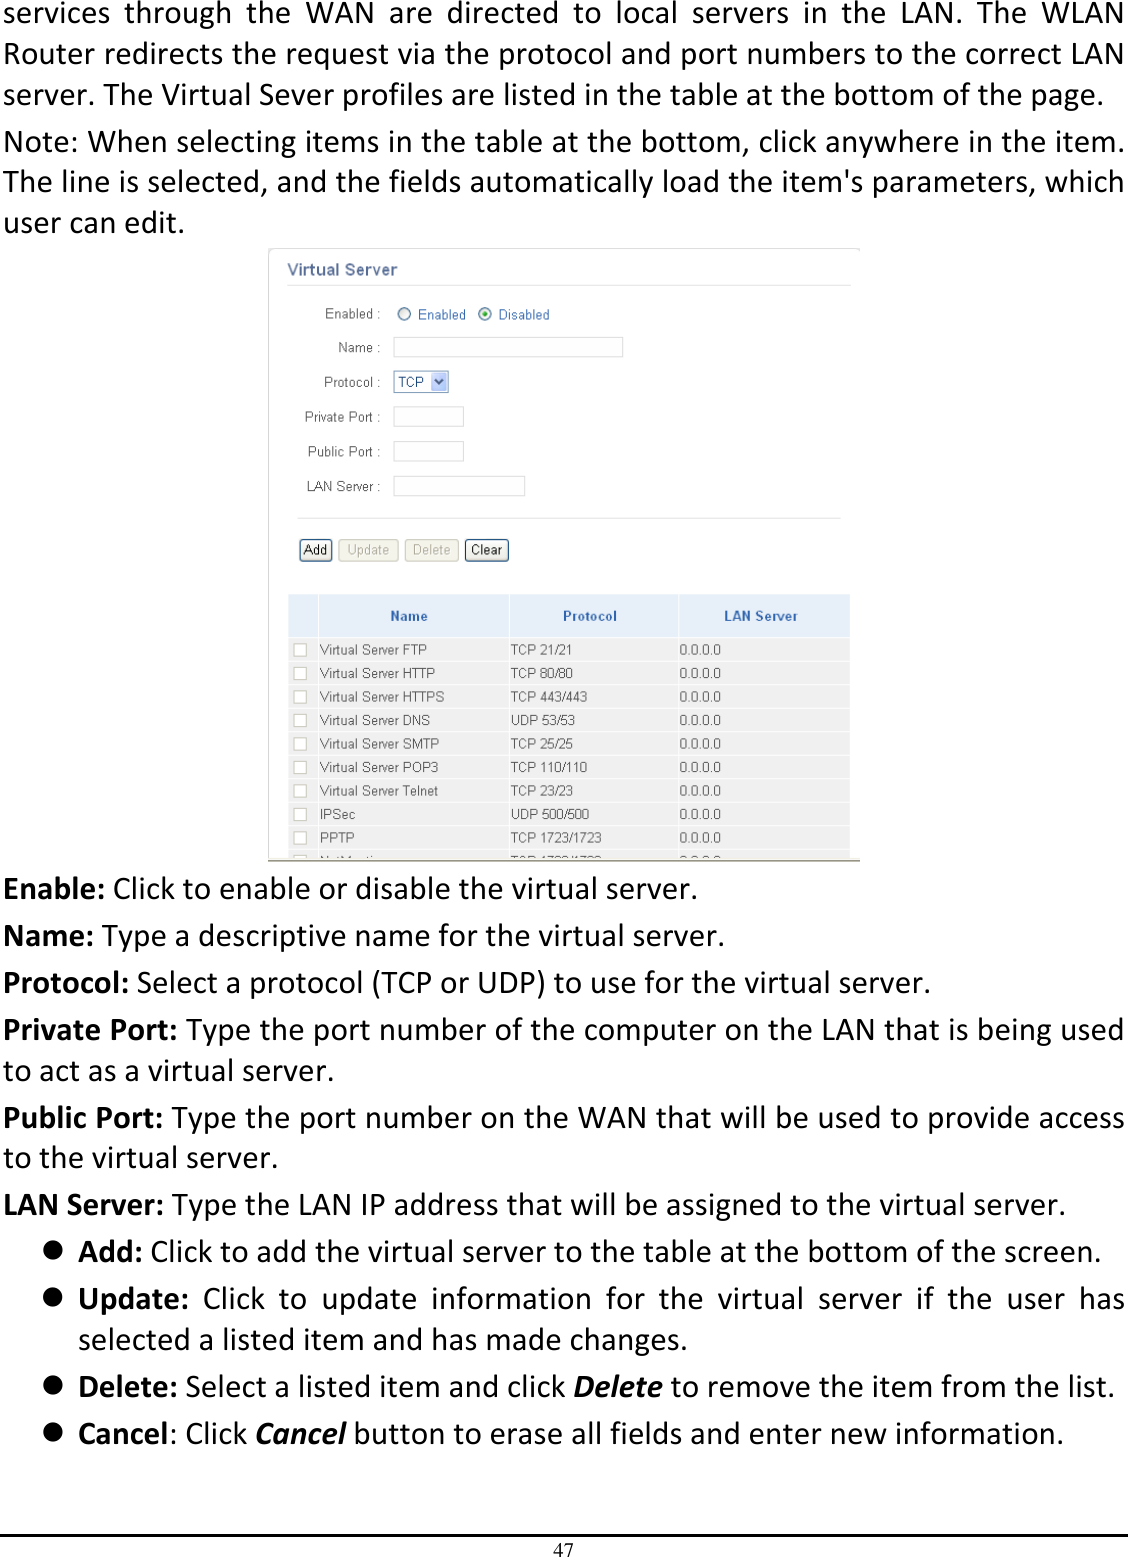 47 services  through  the  WAN  are  directed  to  local  servers  in  the  LAN.  The  WLAN Router redirects the request via the protocol and port numbers to the correct LAN server. The Virtual Sever profiles are listed in the table at the bottom of the page. Note: When selecting items in the table at the bottom, click anywhere in the item. The line is selected, and the fields automatically load the item&apos;s parameters, which user can edit.  Enable: Click to enable or disable the virtual server. Name: Type a descriptive name for the virtual server. Protocol: Select a protocol (TCP or UDP) to use for the virtual server. Private Port: Type the port number of the computer on the LAN that is being used to act as a virtual server. Public Port: Type the port number on the WAN that will be used to provide access to the virtual server. LAN Server: Type the LAN IP address that will be assigned to the virtual server.  Add: Click to add the virtual server to the table at the bottom of the screen.  Update:  Click  to  update  information  for  the  virtual  server  if  the  user  has selected a listed item and has made changes.  Delete: Select a listed item and click Delete to remove the item from the list.  Cancel: Click Cancel button to erase all fields and enter new information. 